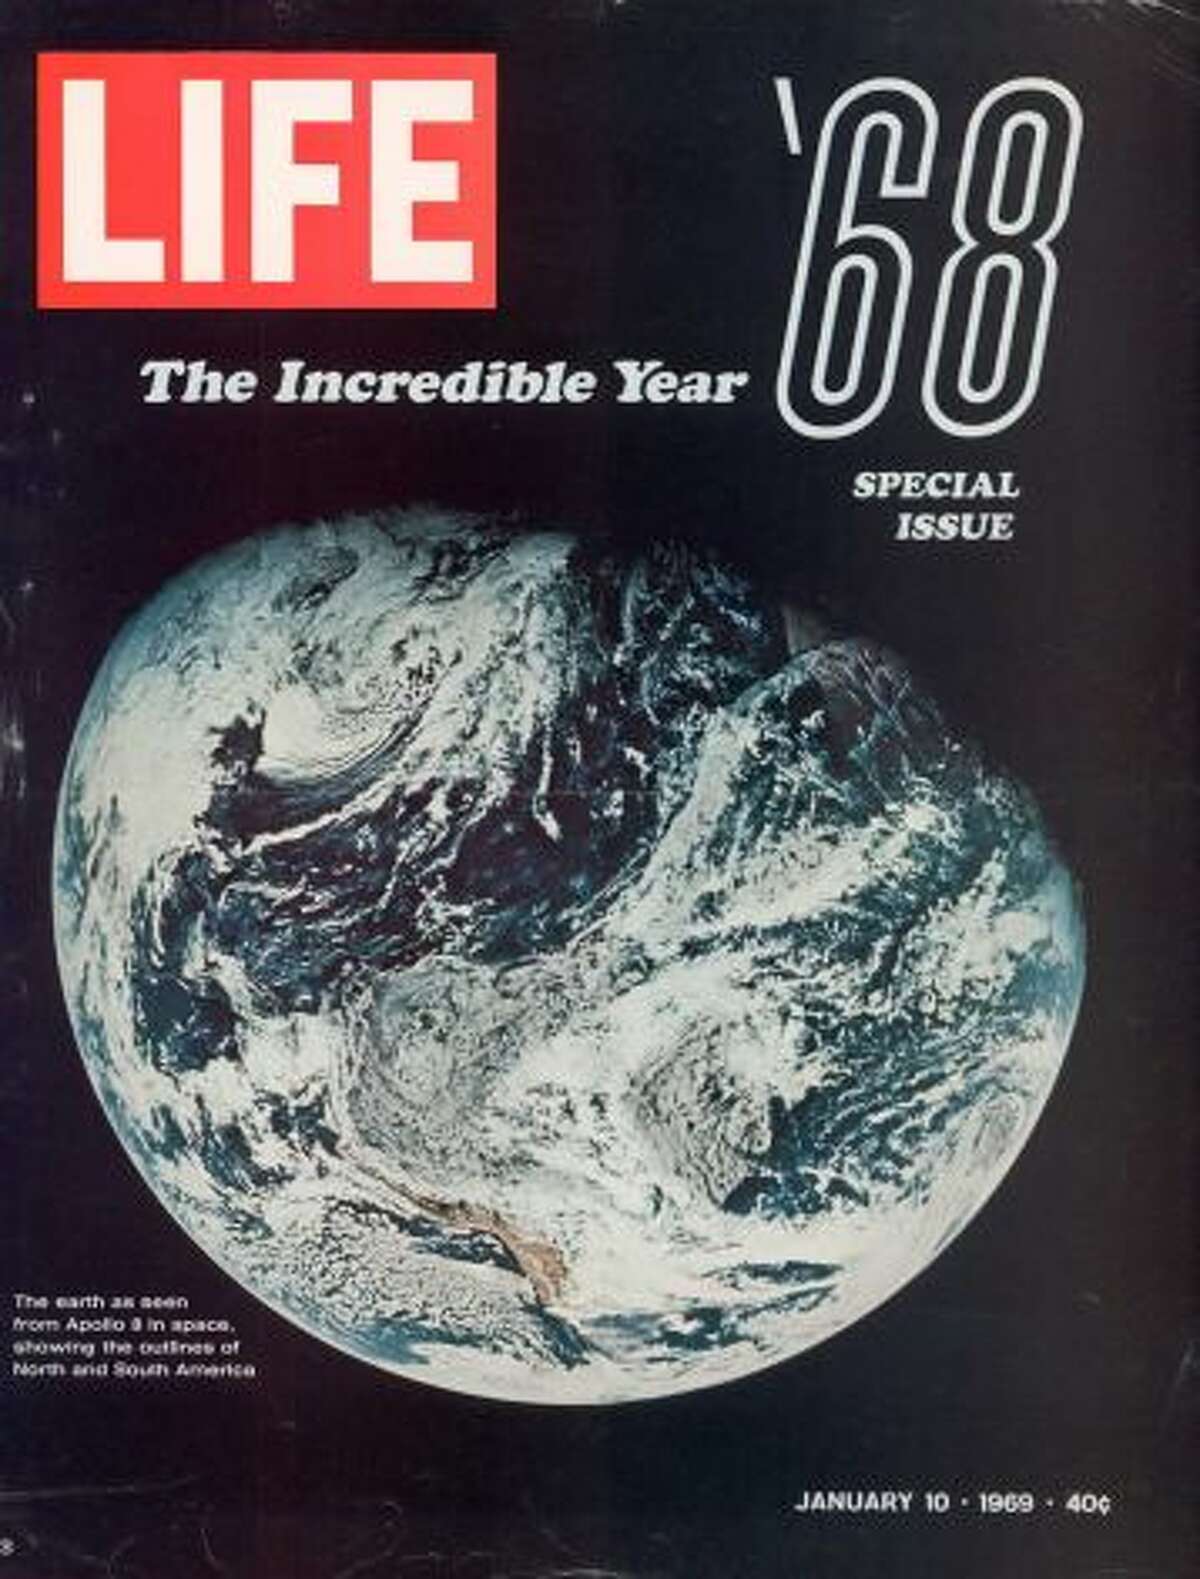 The 1968 Special Issue featuring NASA pic showing Earth from space as seen by the Apollo 8 mission. (Photo by Life Magazine/Life Magazine/Time & Life Pictures/Getty Images)